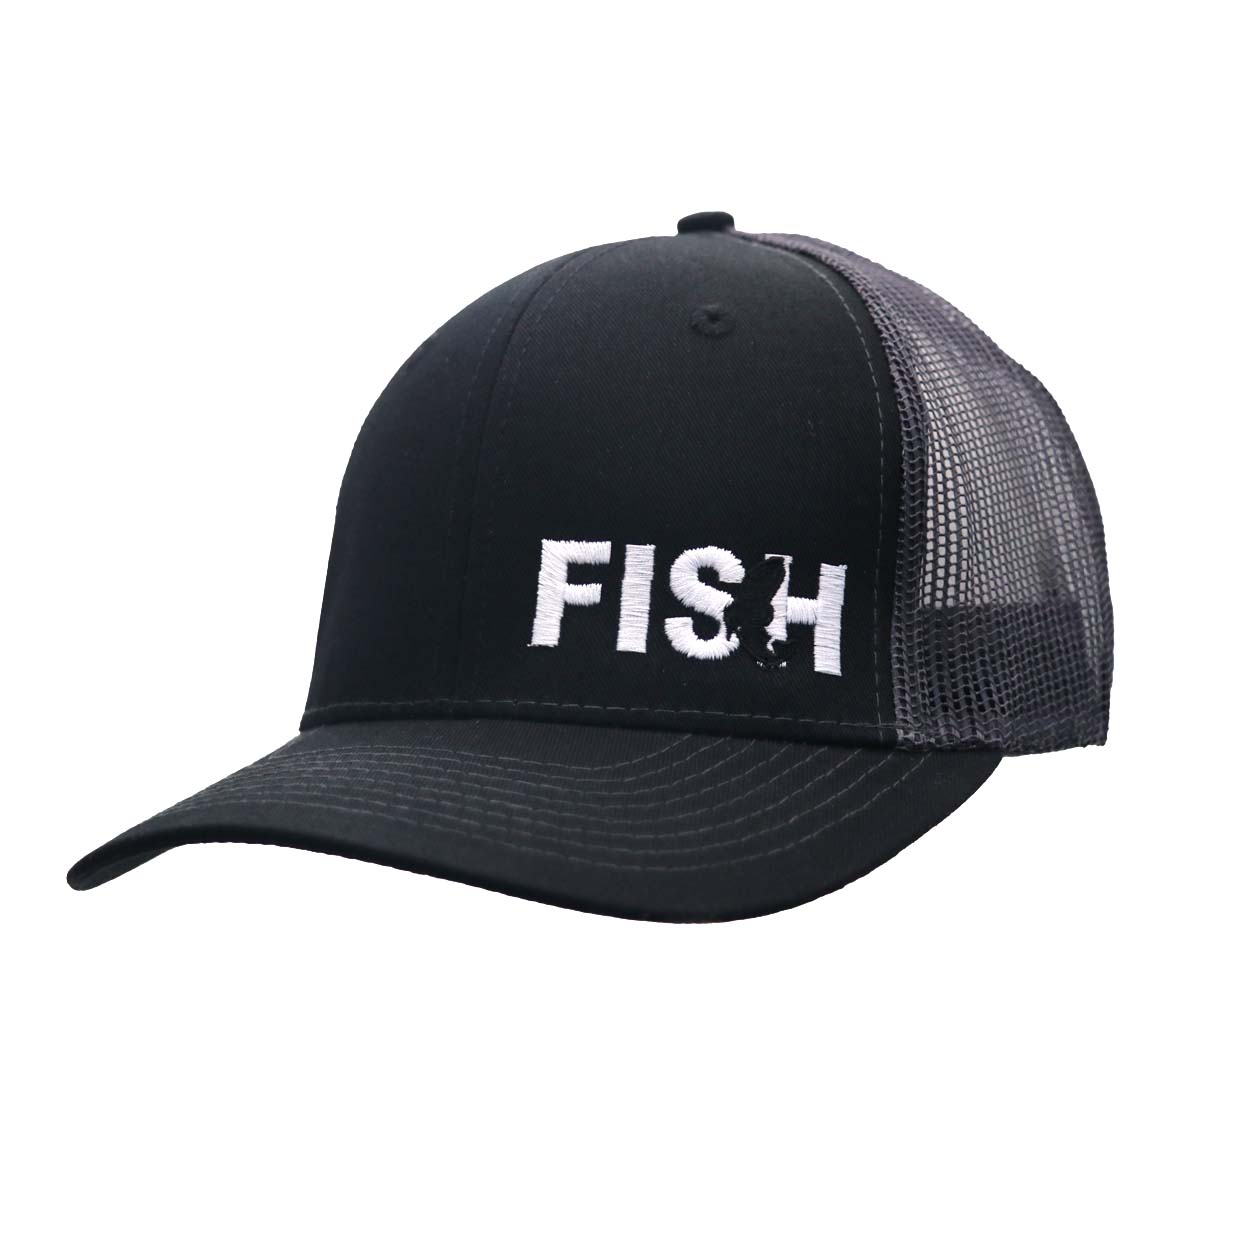 Fish Catch Logo Night Out Embroidered Snapback Trucker Hat Black/Gray